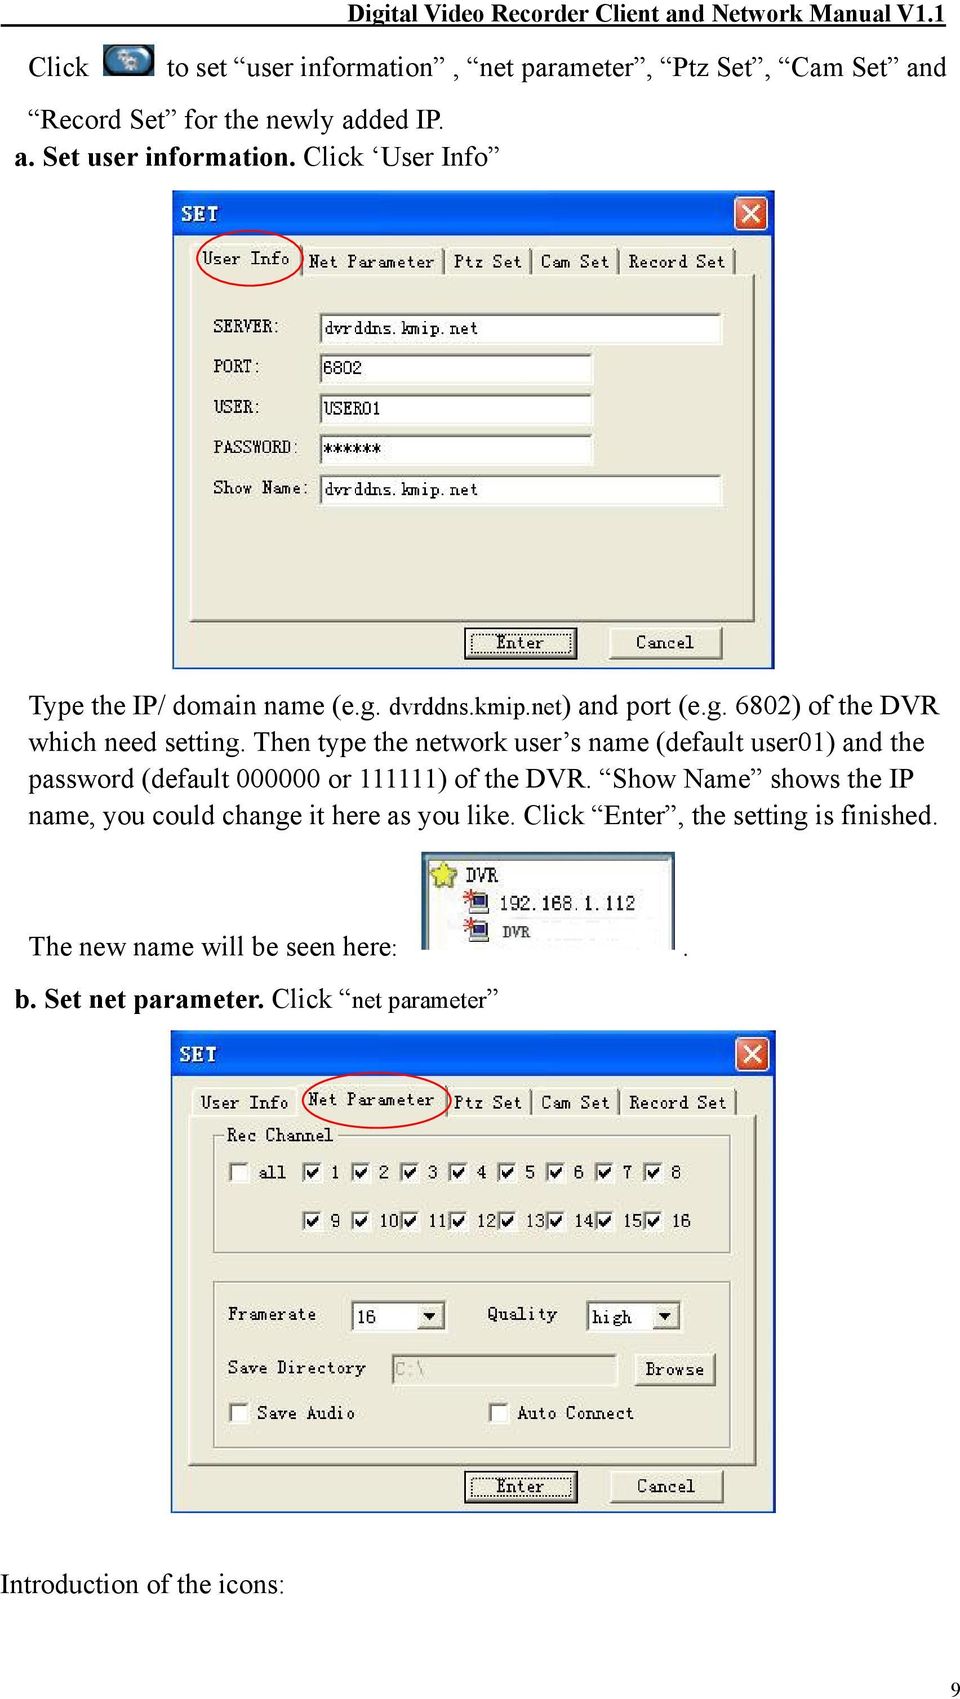 Click User Info Type the IP/ domain name (e.g. dvrddns.kmip.net) and port (e.g. 6802) of the DVR which need setting.